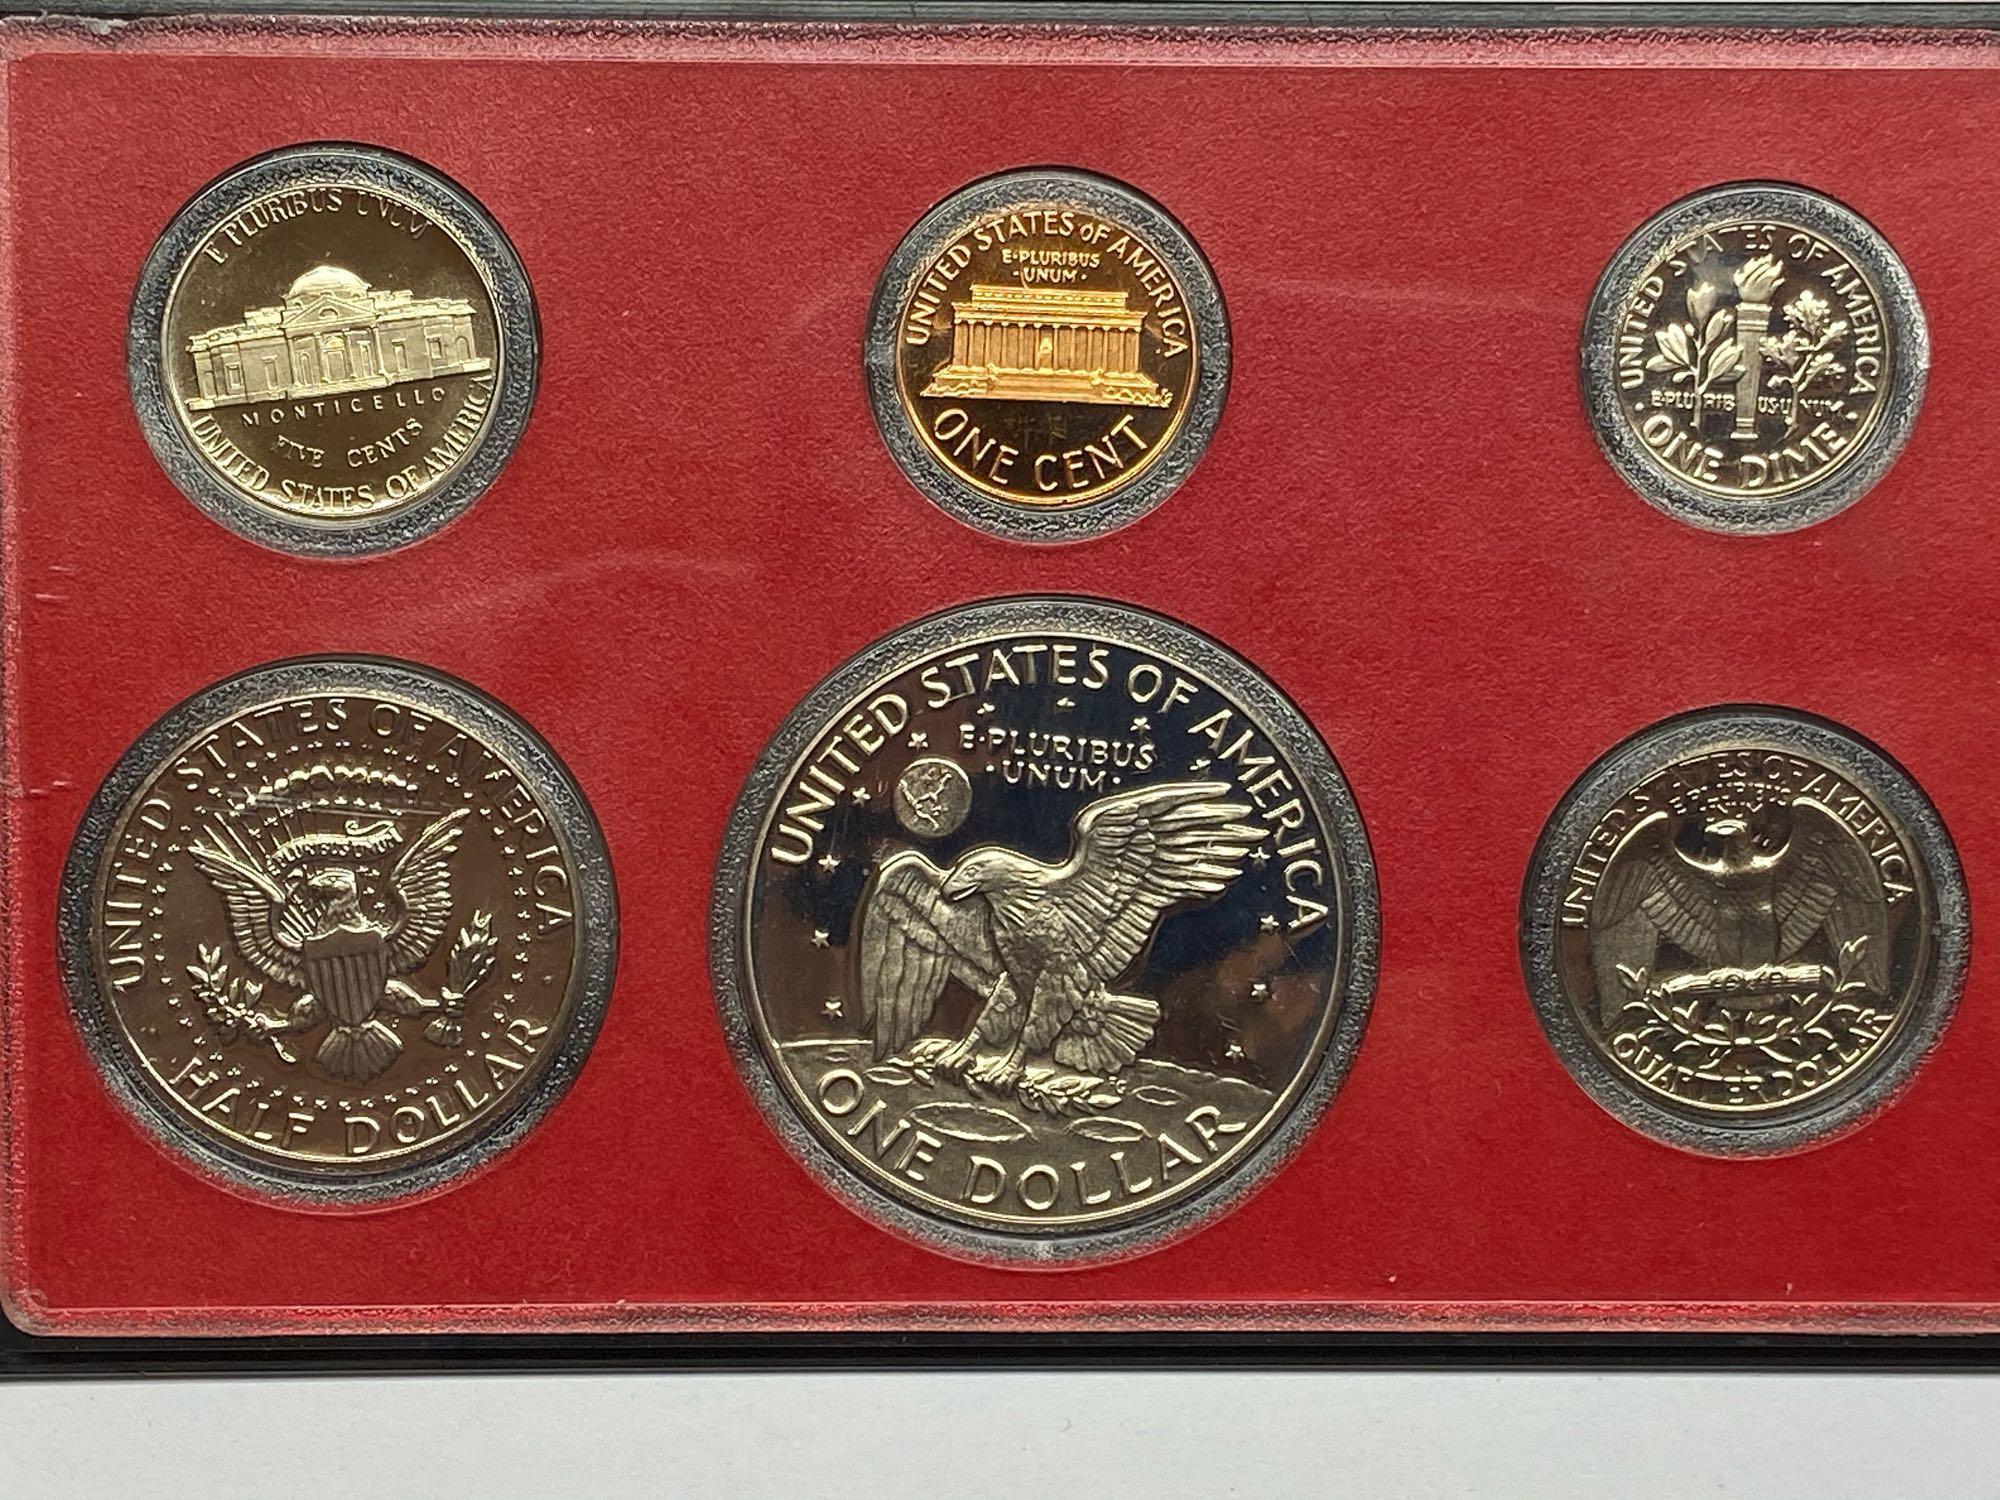 Collection of 14 United States Mint Proof Sets of Coins 1968-1992 in Original Packaging